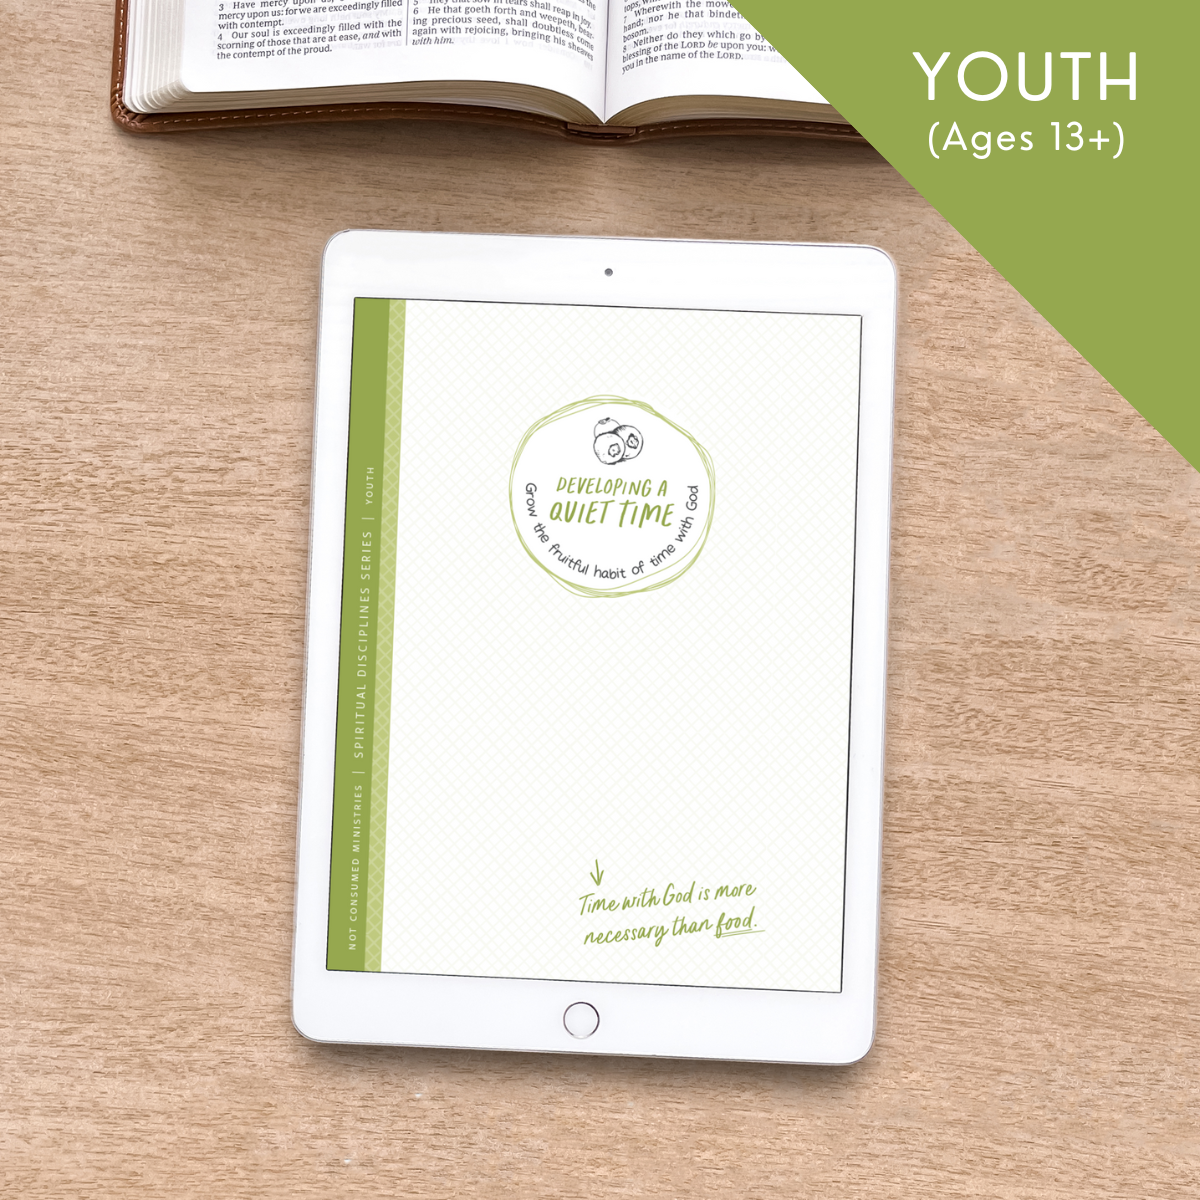 Decided Teen bible study- Youth Level